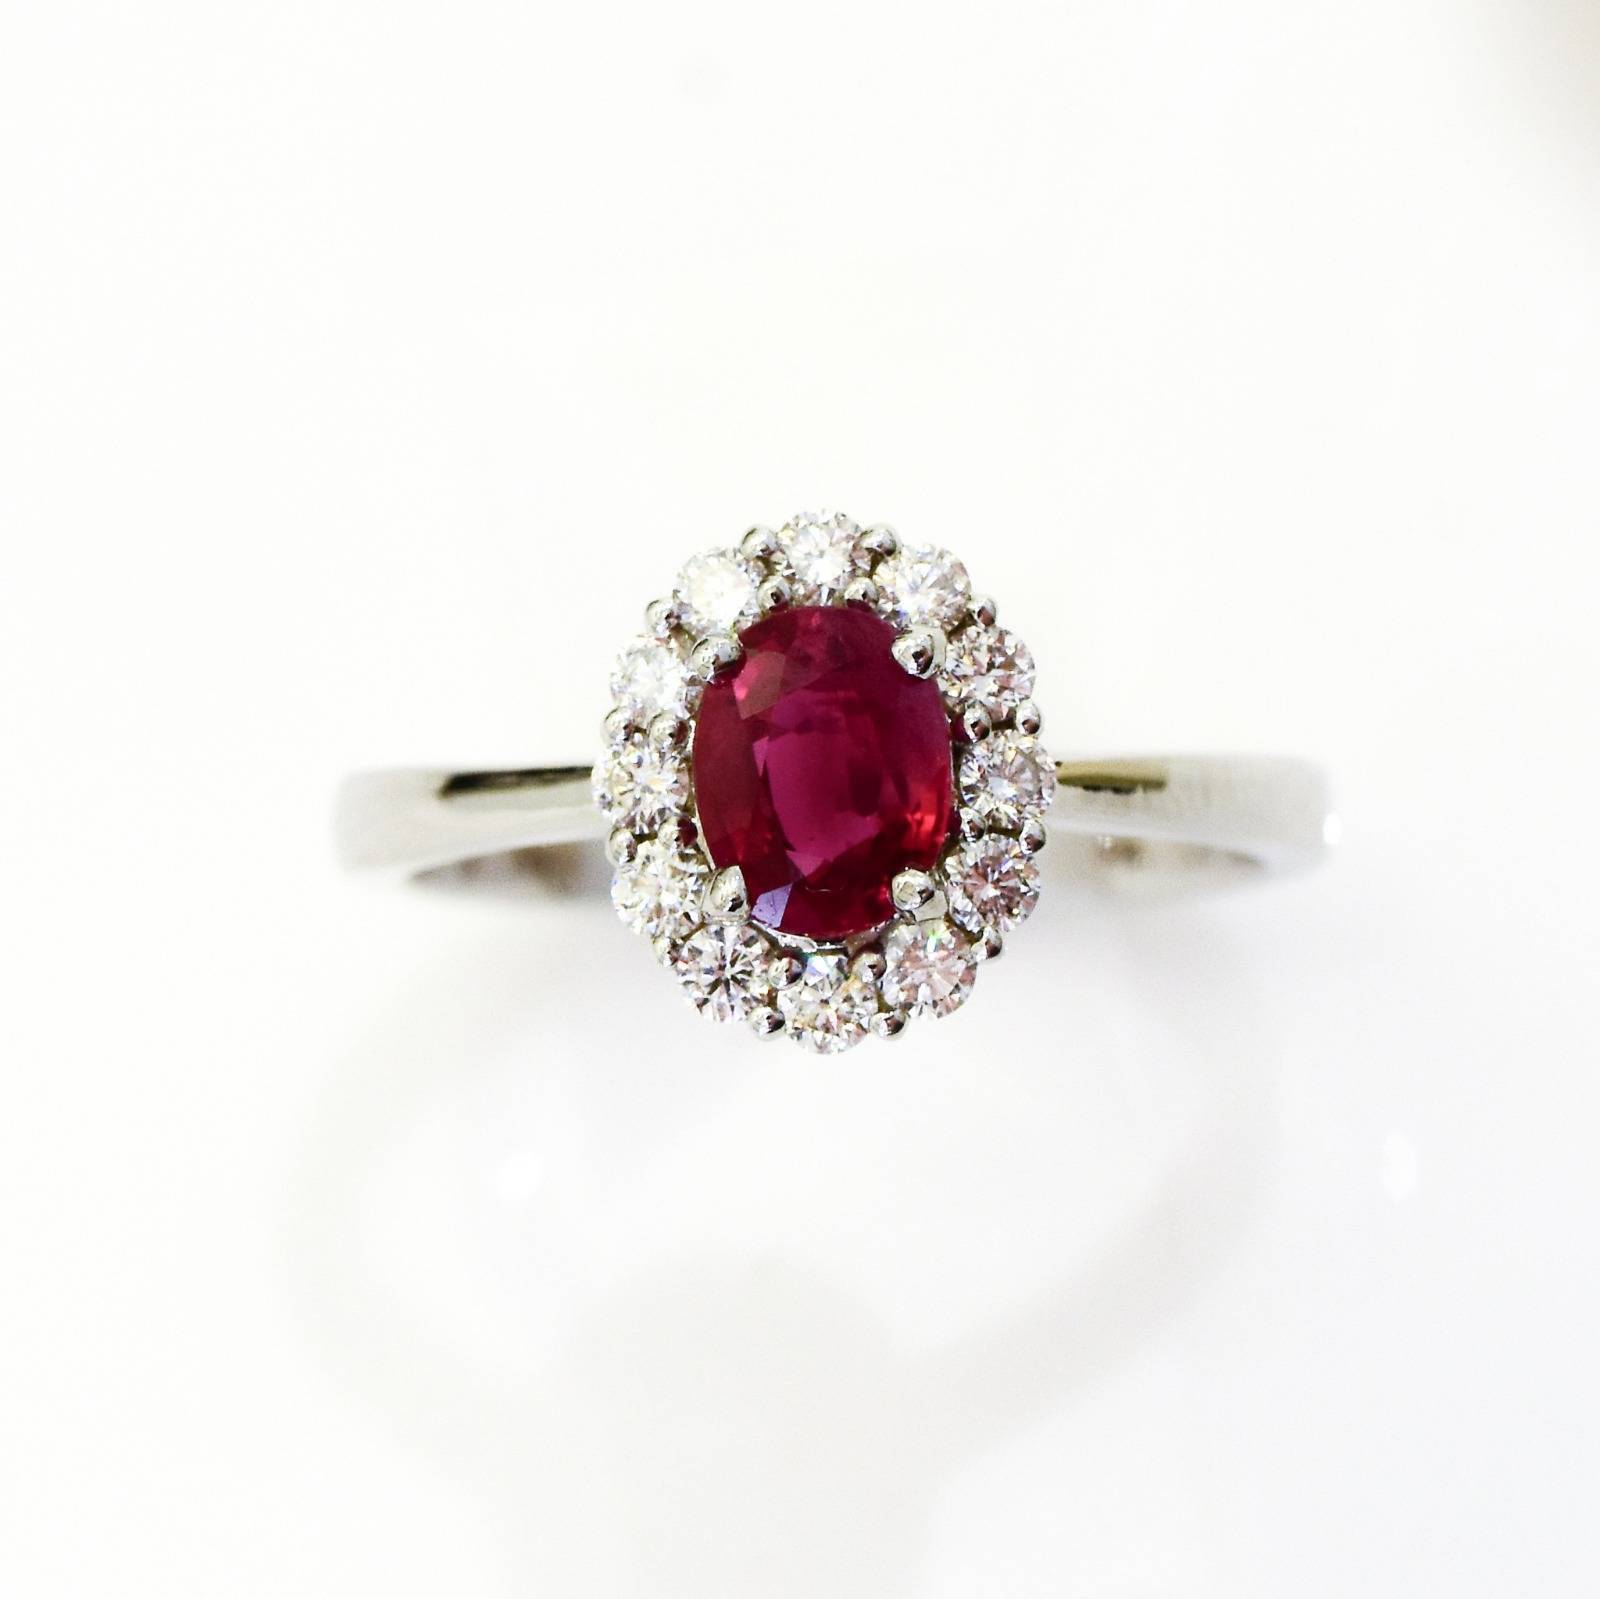 Natural Ruby and Diamonds Ring in 18K White Gold - Gemstone Western